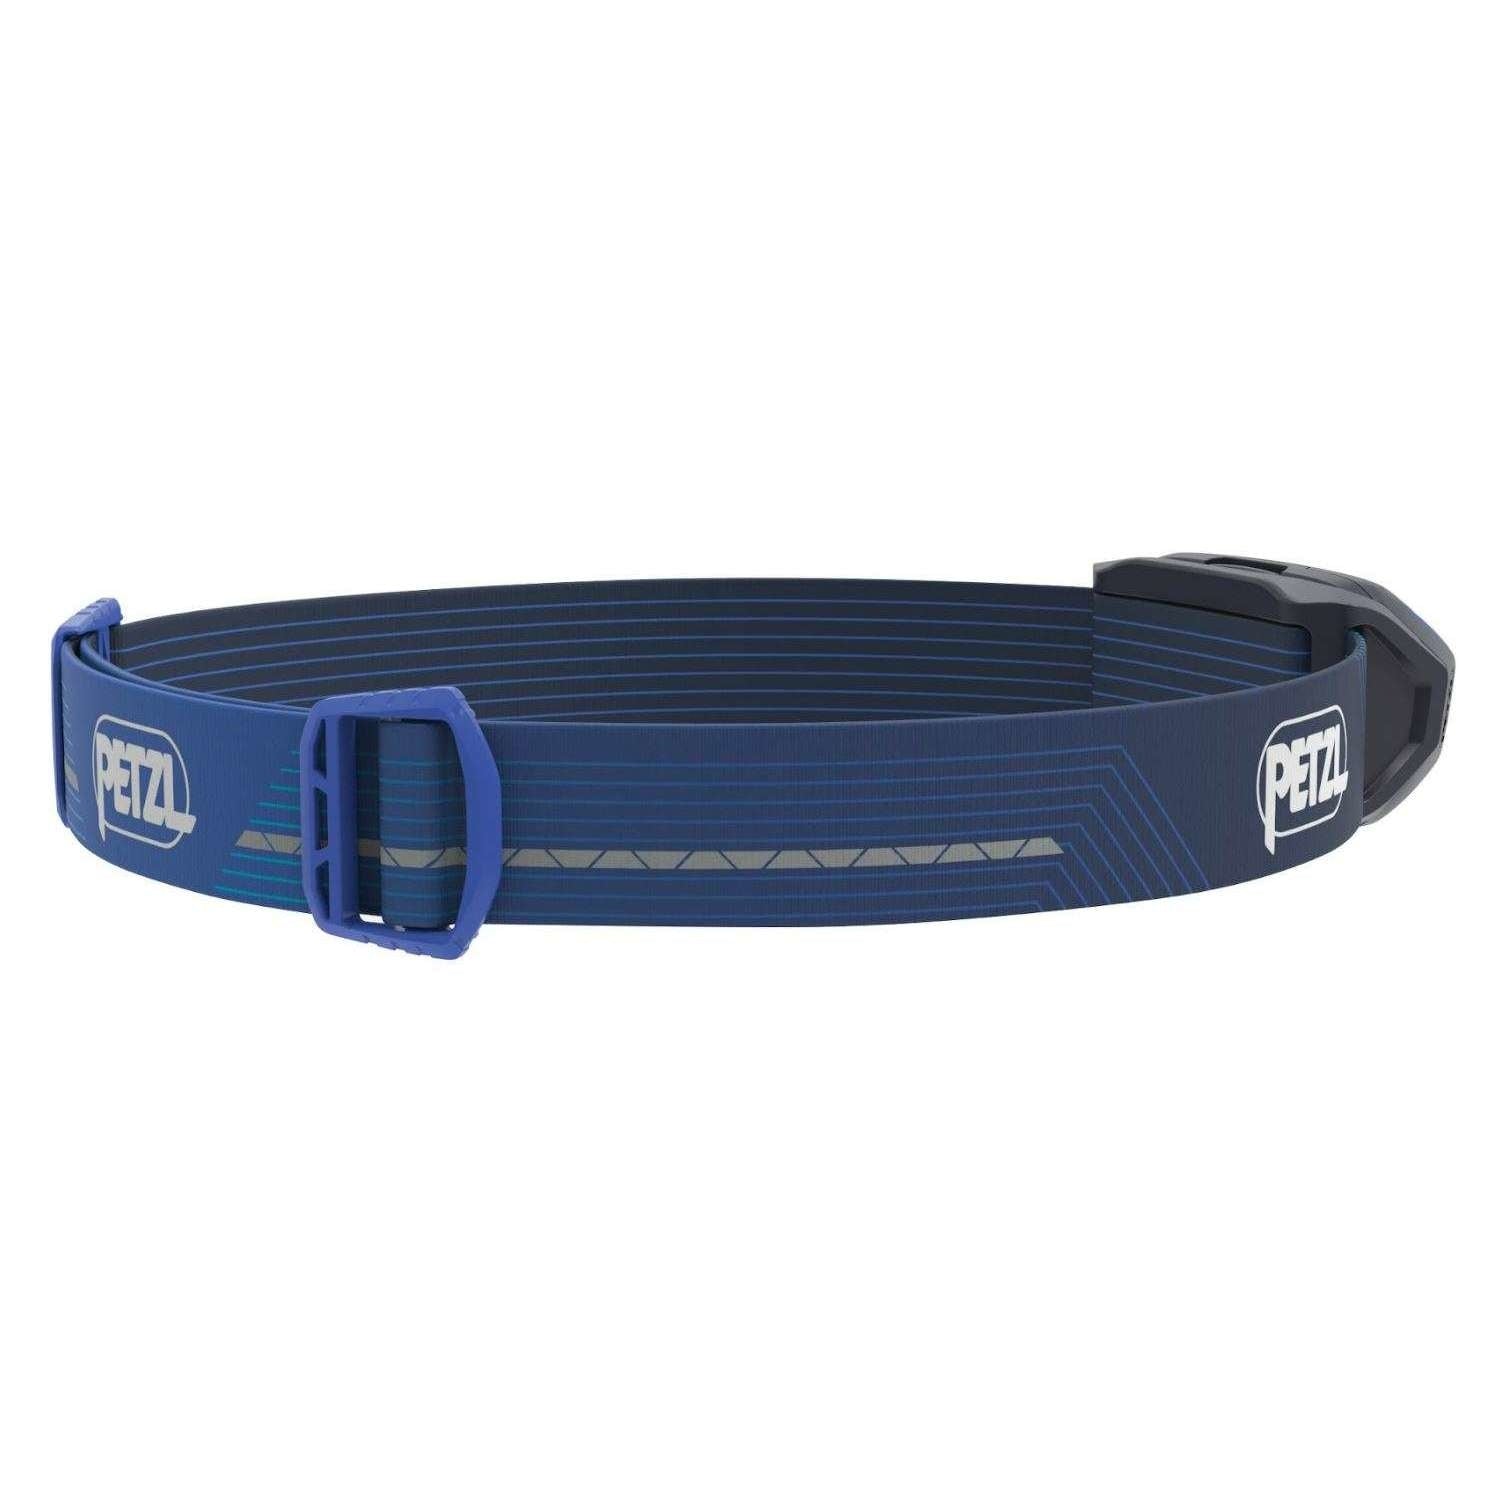 NEW PETZL ACTIK CORE 600 HEADLAMP COLOR BLUE FAST FREE SHIPPING